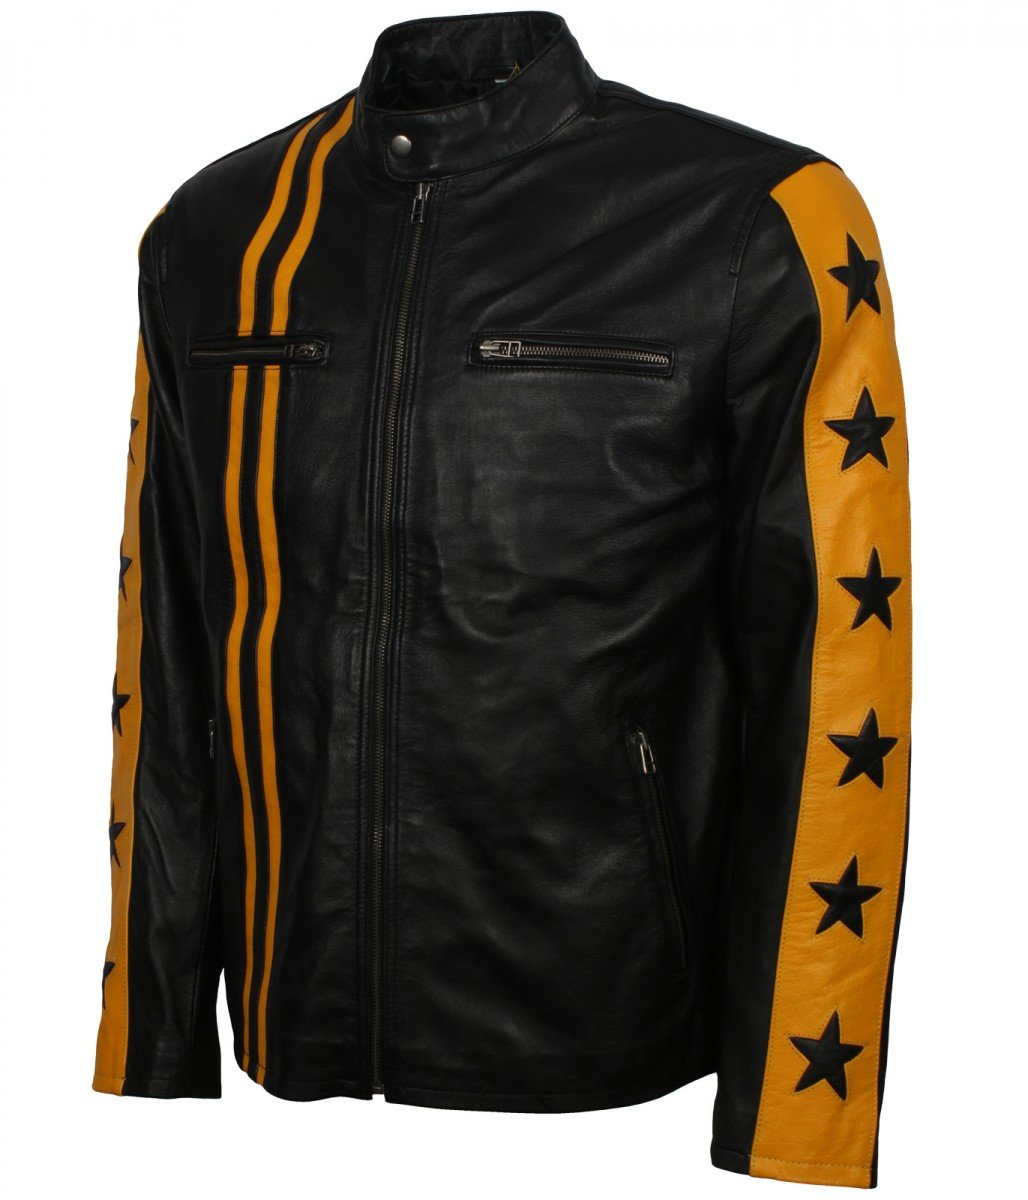 Yellow Star Stripes Jacket for Men's Black Leather Jacket